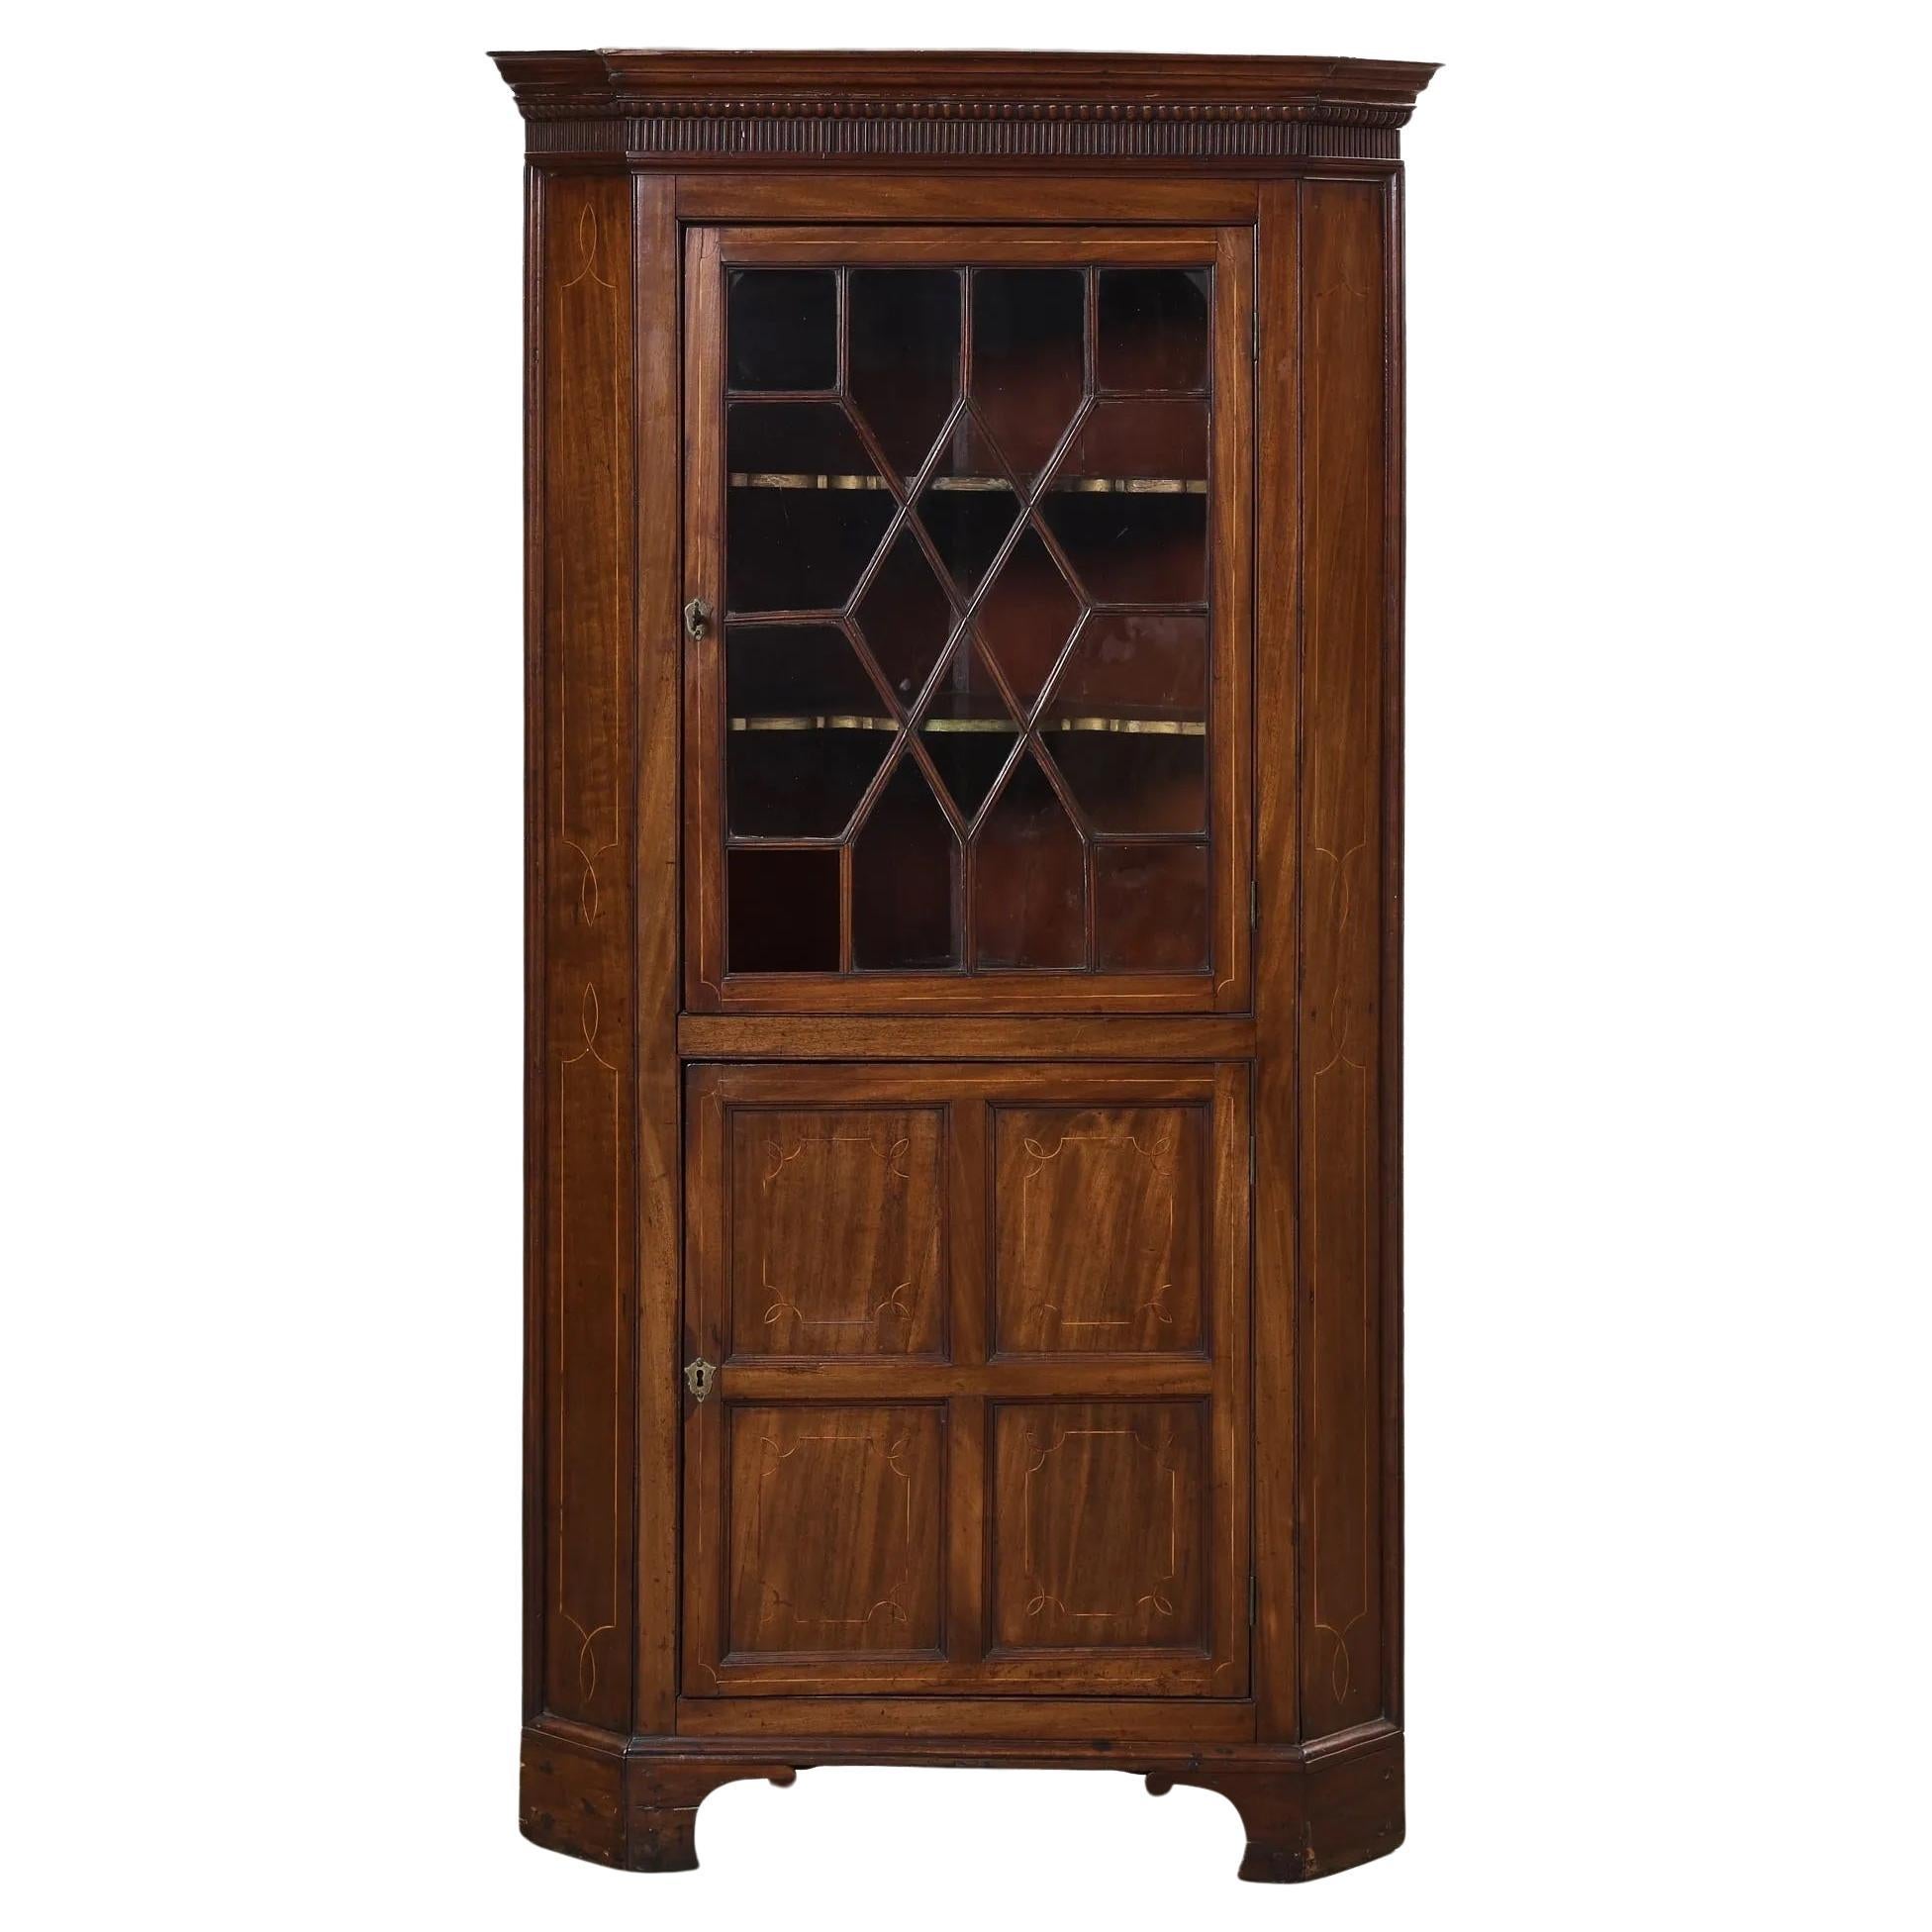 Late 1700's American Federal Inlaid Mahogany Corner Cabinet w/ Dentil Molding